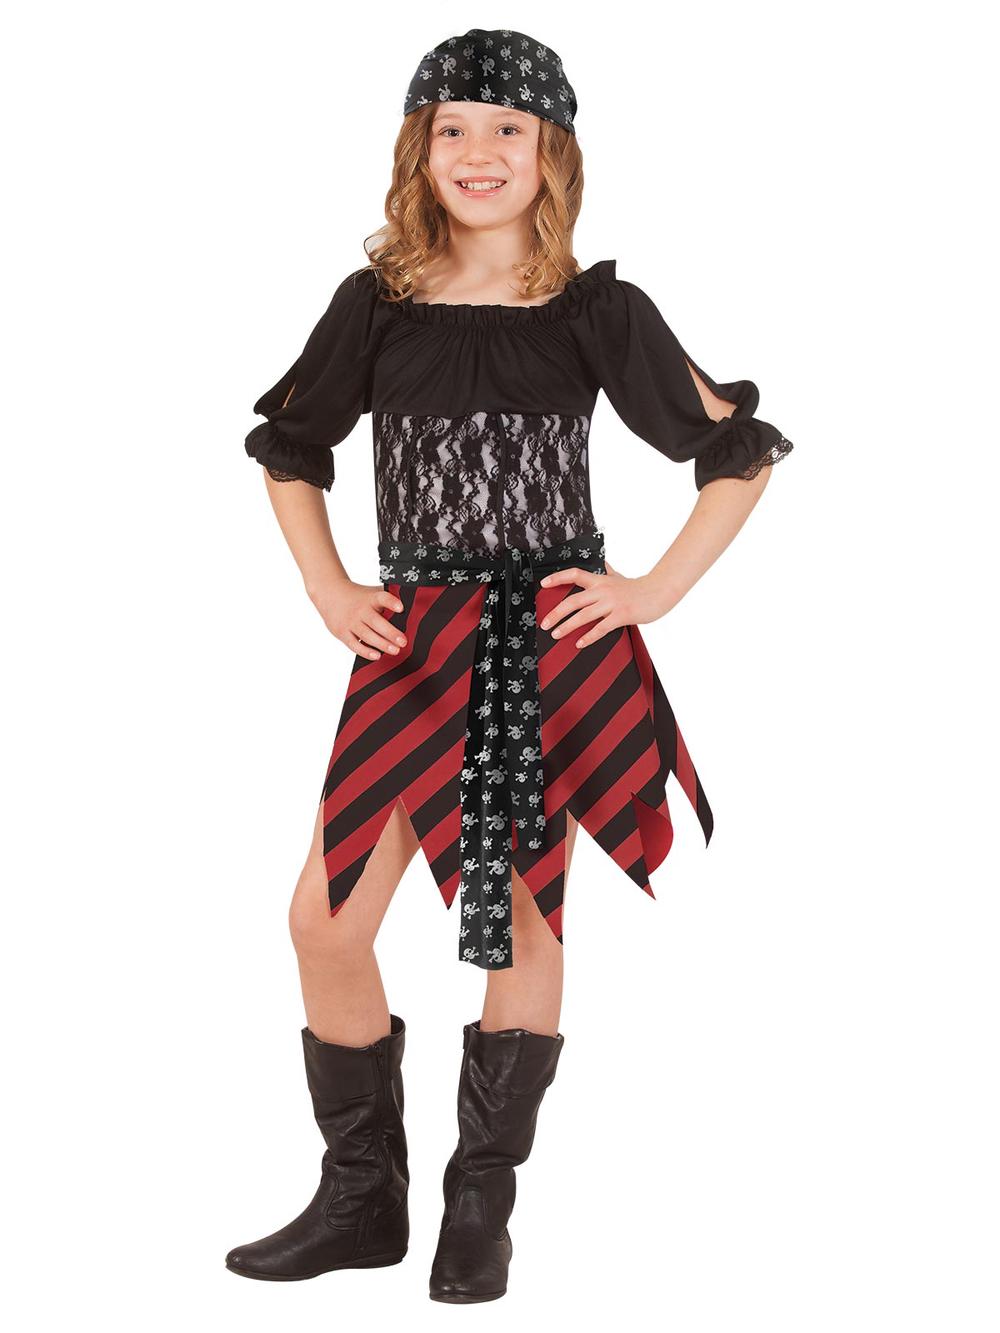 Rubies Pirate Child Costume - Tween Size | Buy online at The Nile